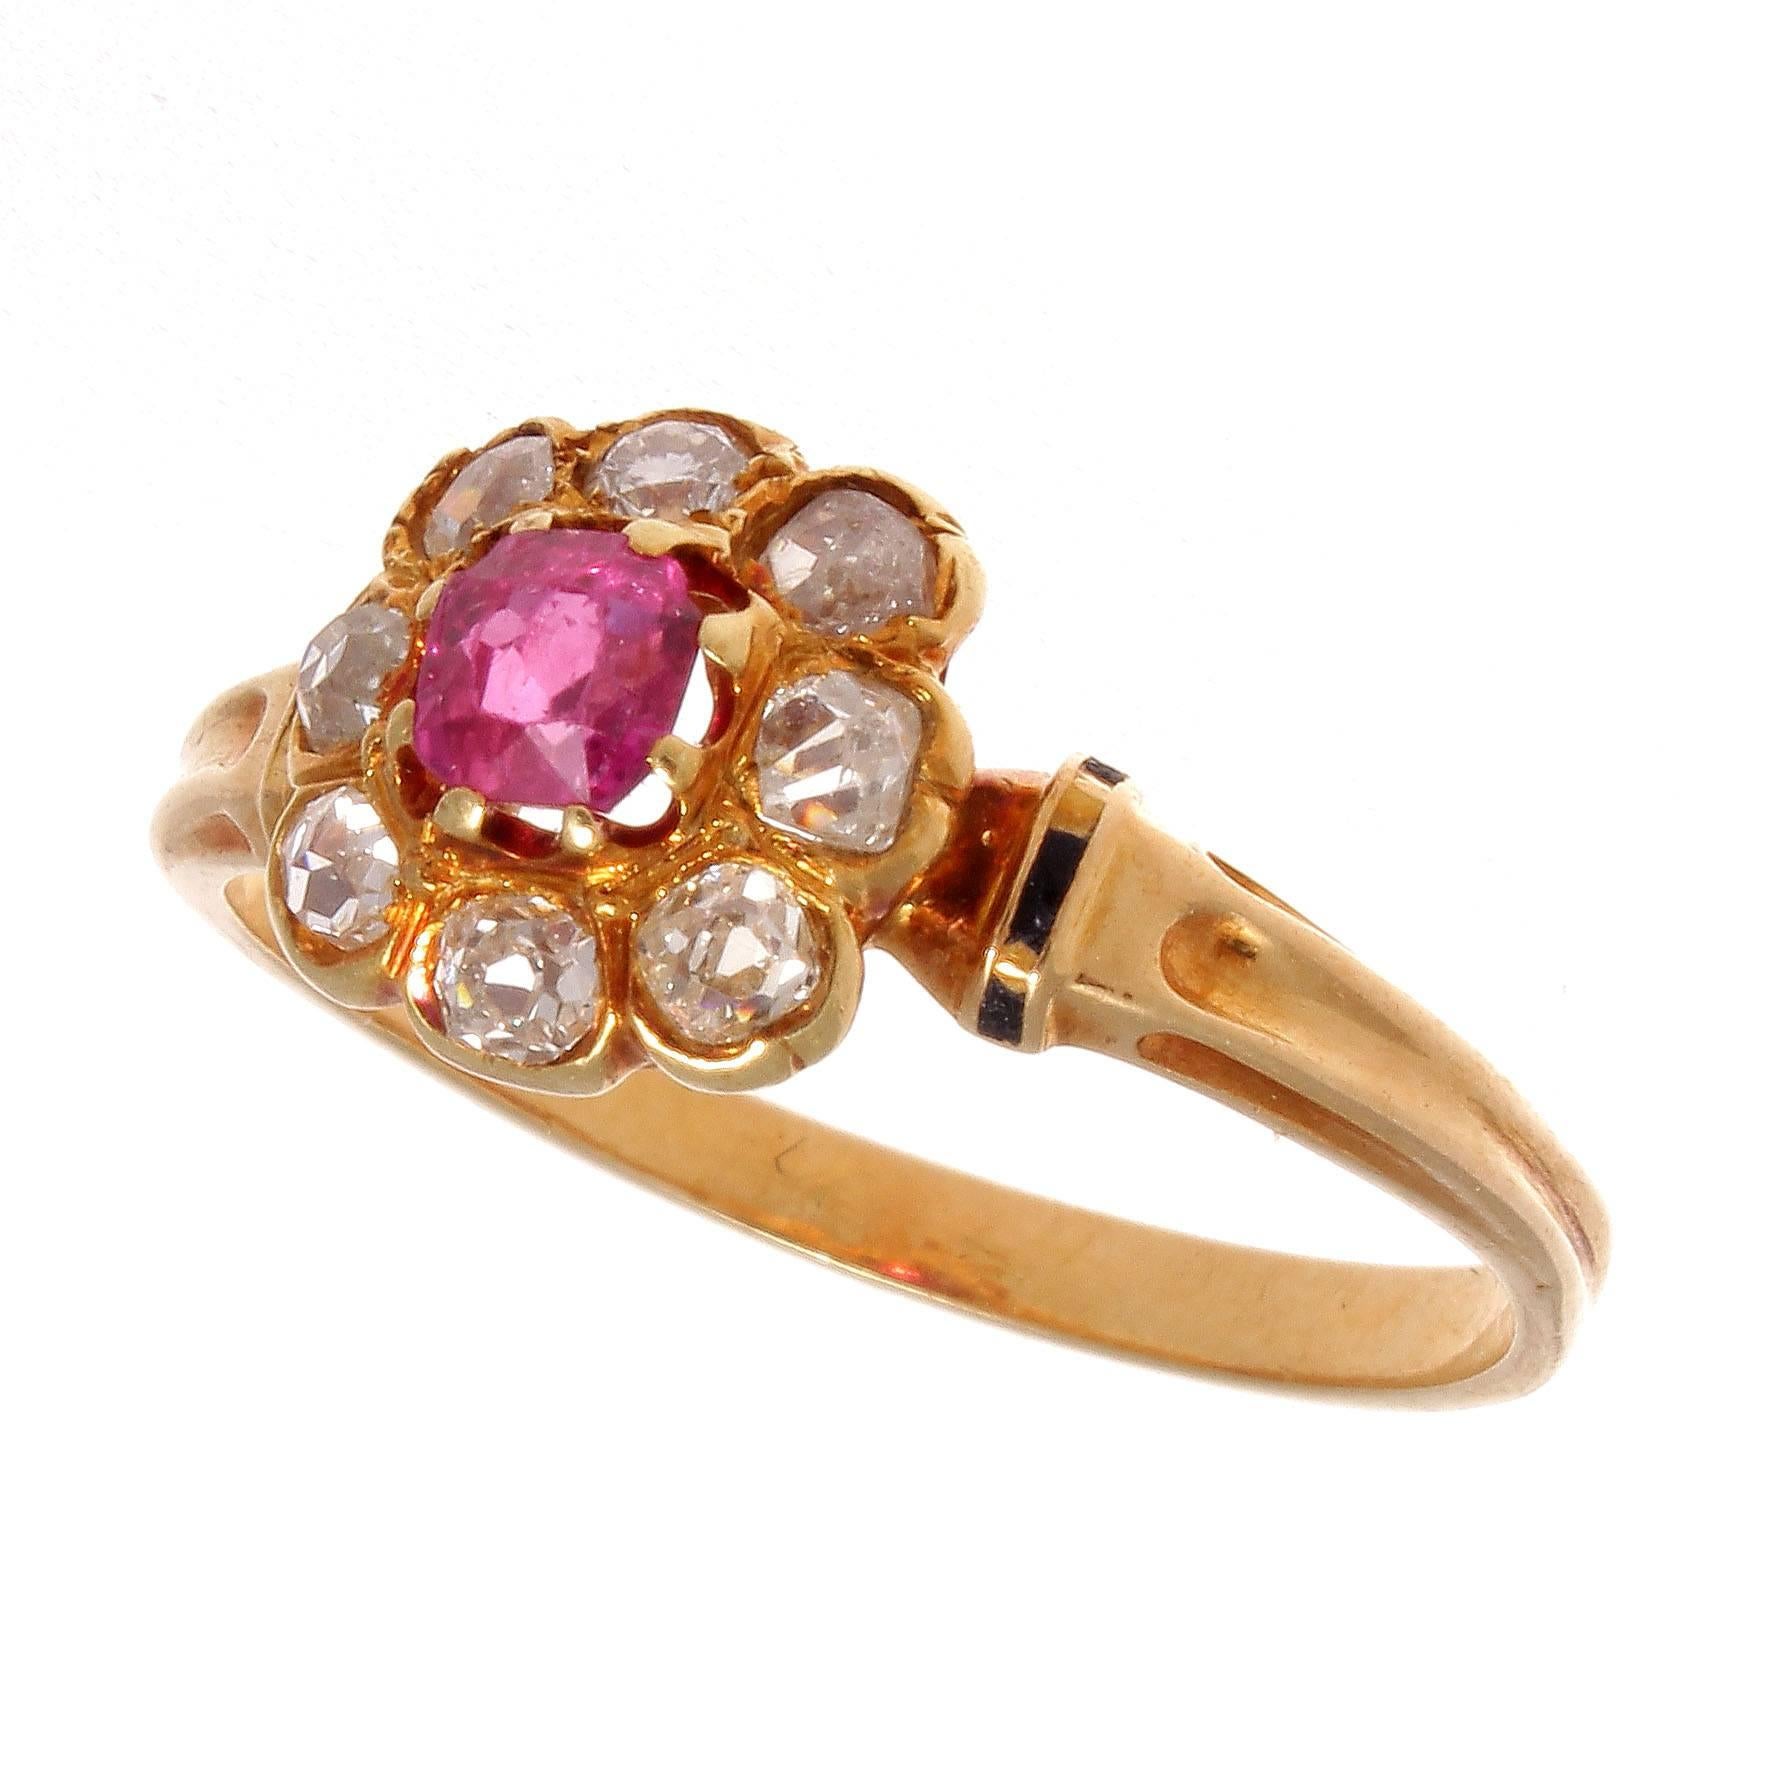 French designers have always been the architects of style and its easily displayed in this 19th century cluster ring. Influenced by the blossoming flowers of spring this ring explodes with bright colors. Featuring a vibrant red ruby center